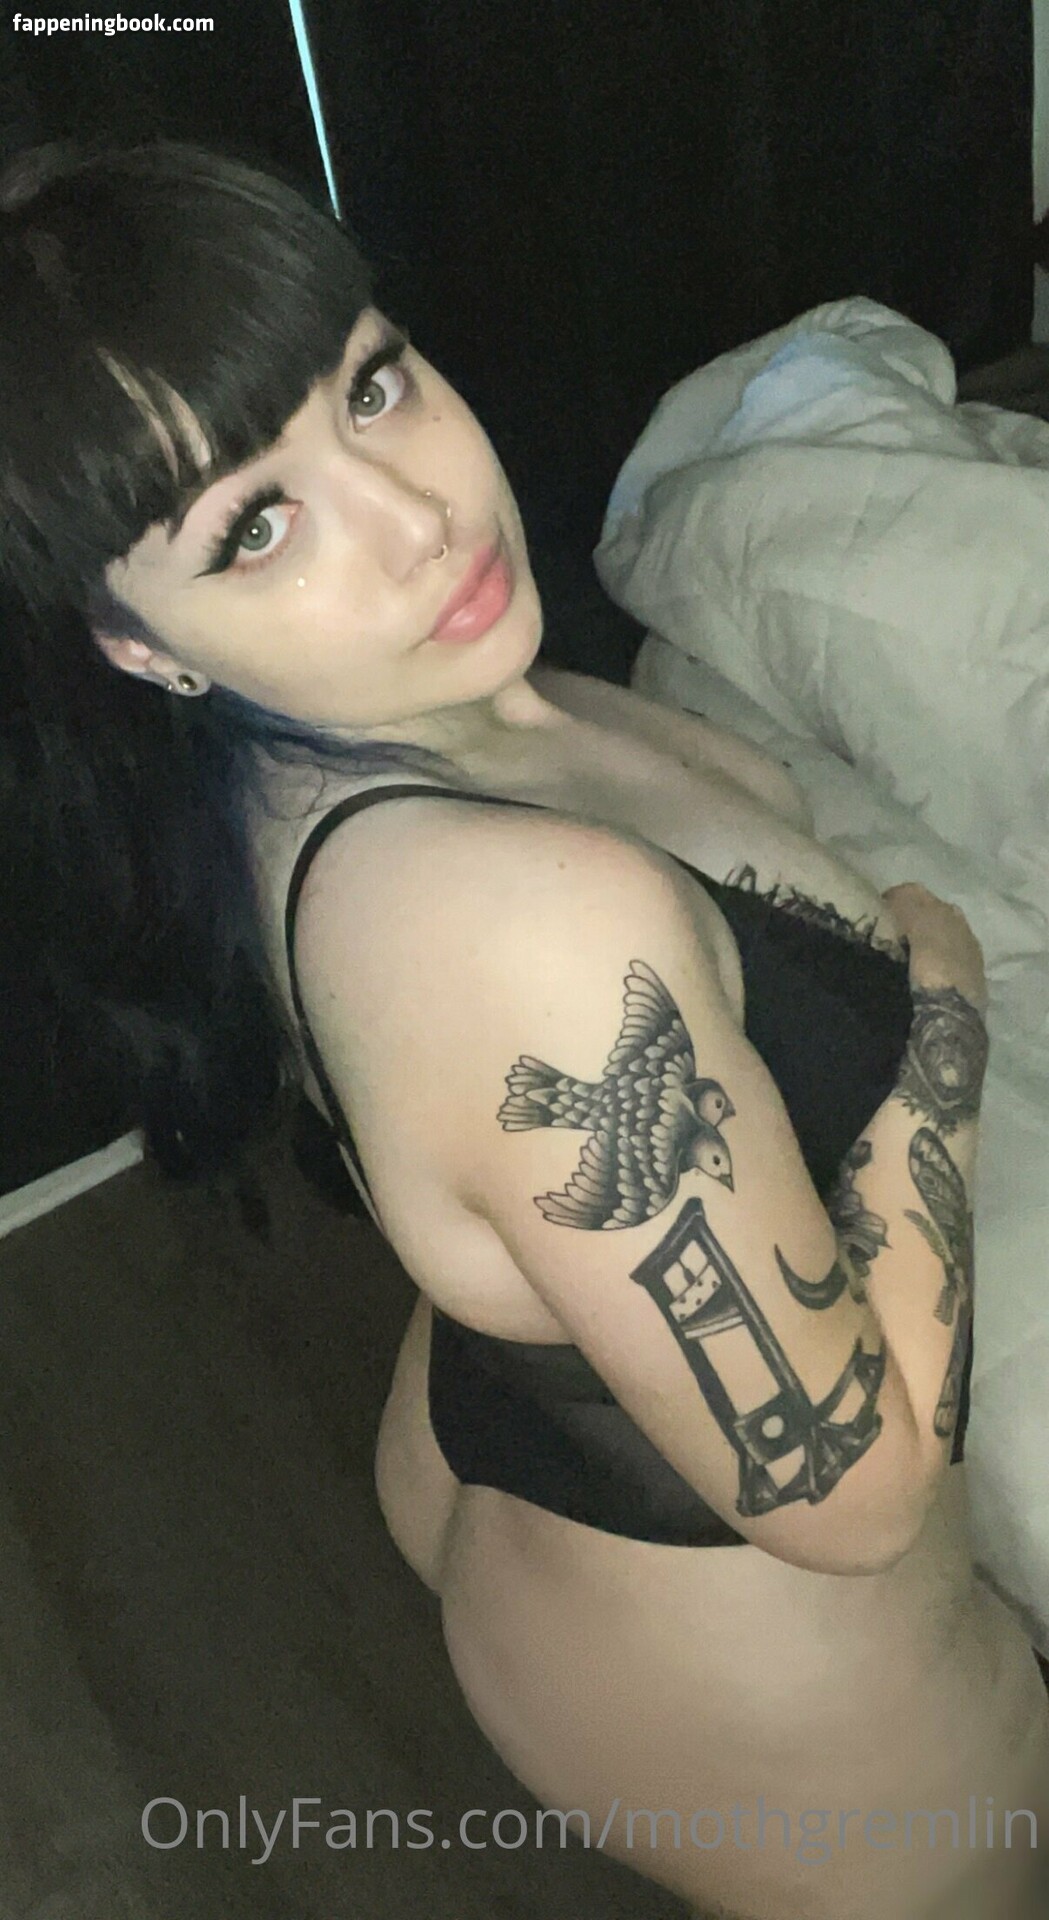 mothgremlin onlyfans the fappening fappeningbook